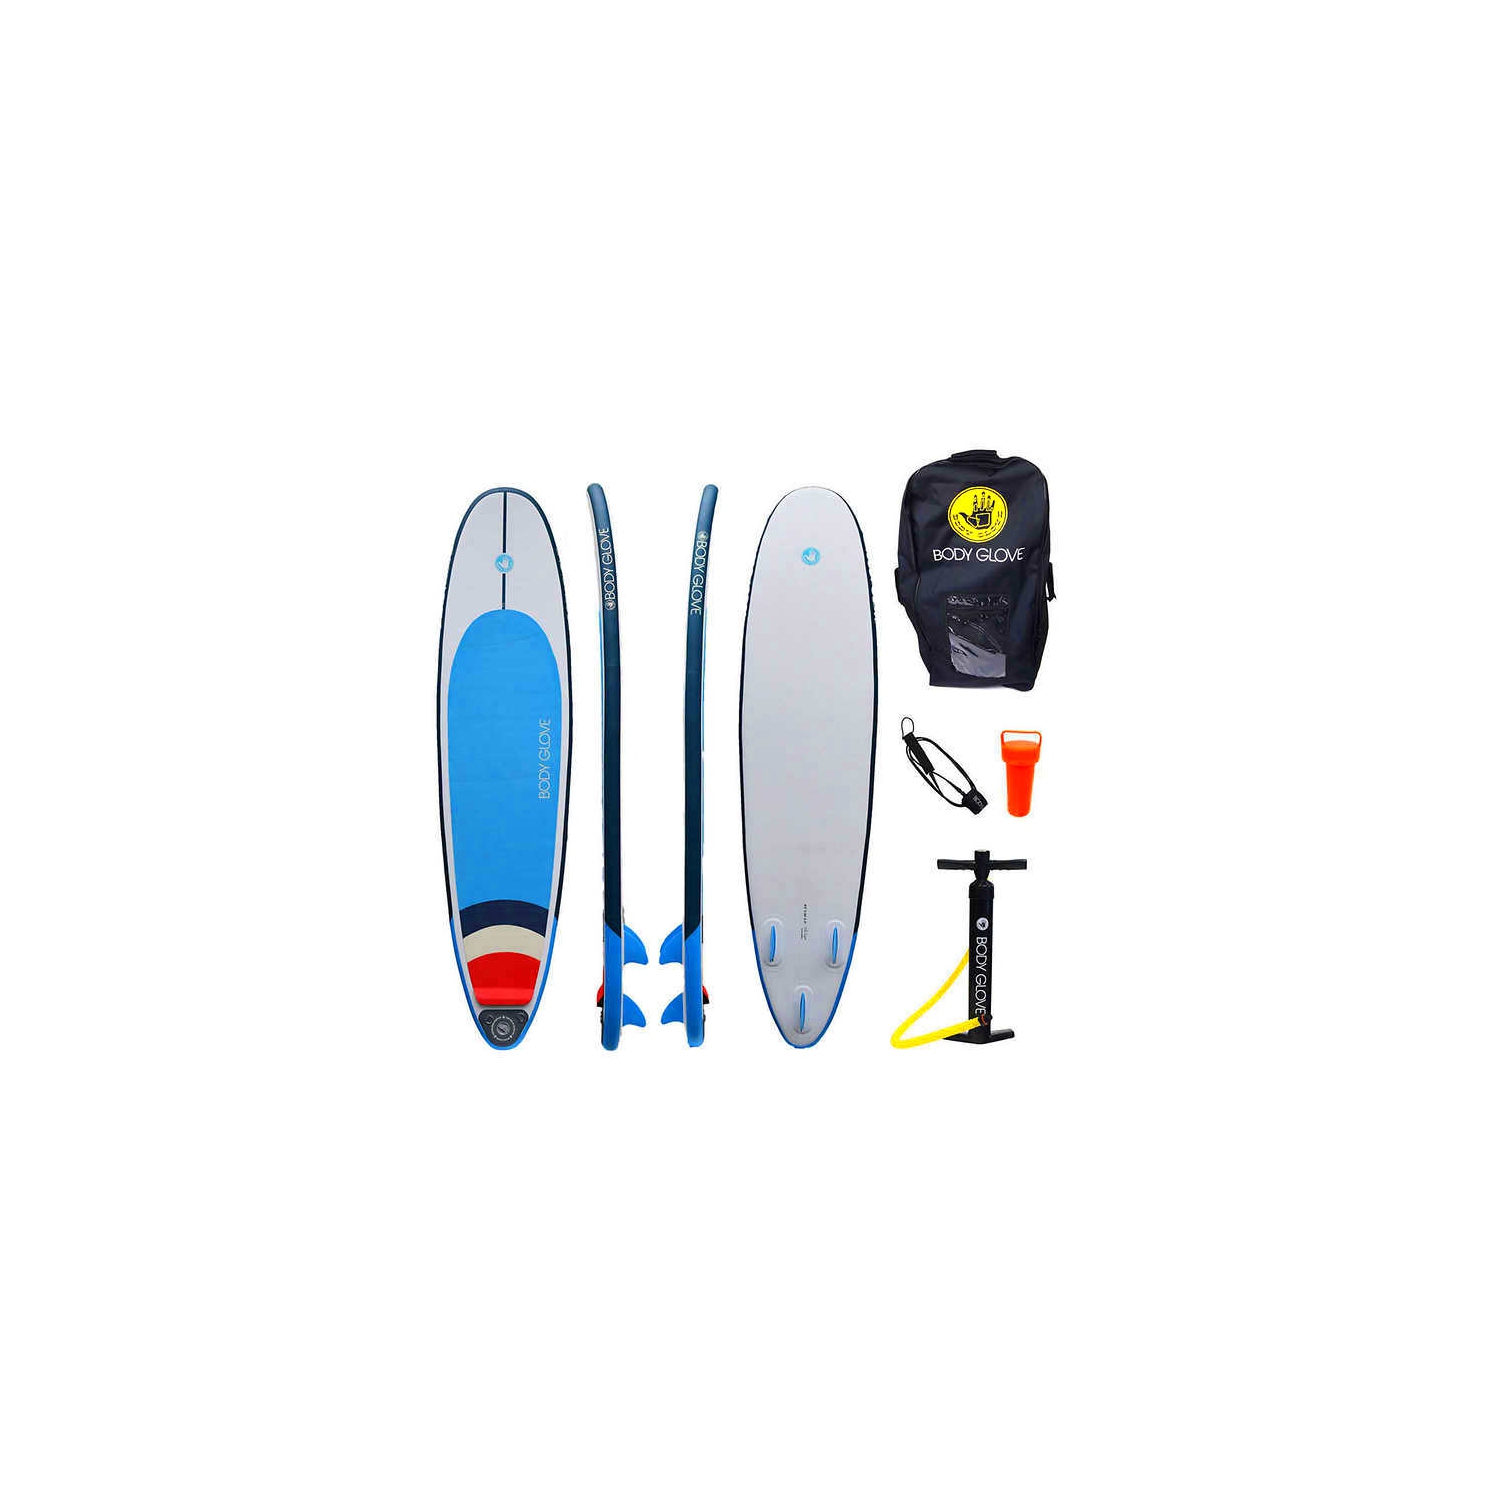 Body Glove EZ 2.5 m (8 ft. 2 in.) Inflatable Surfboard